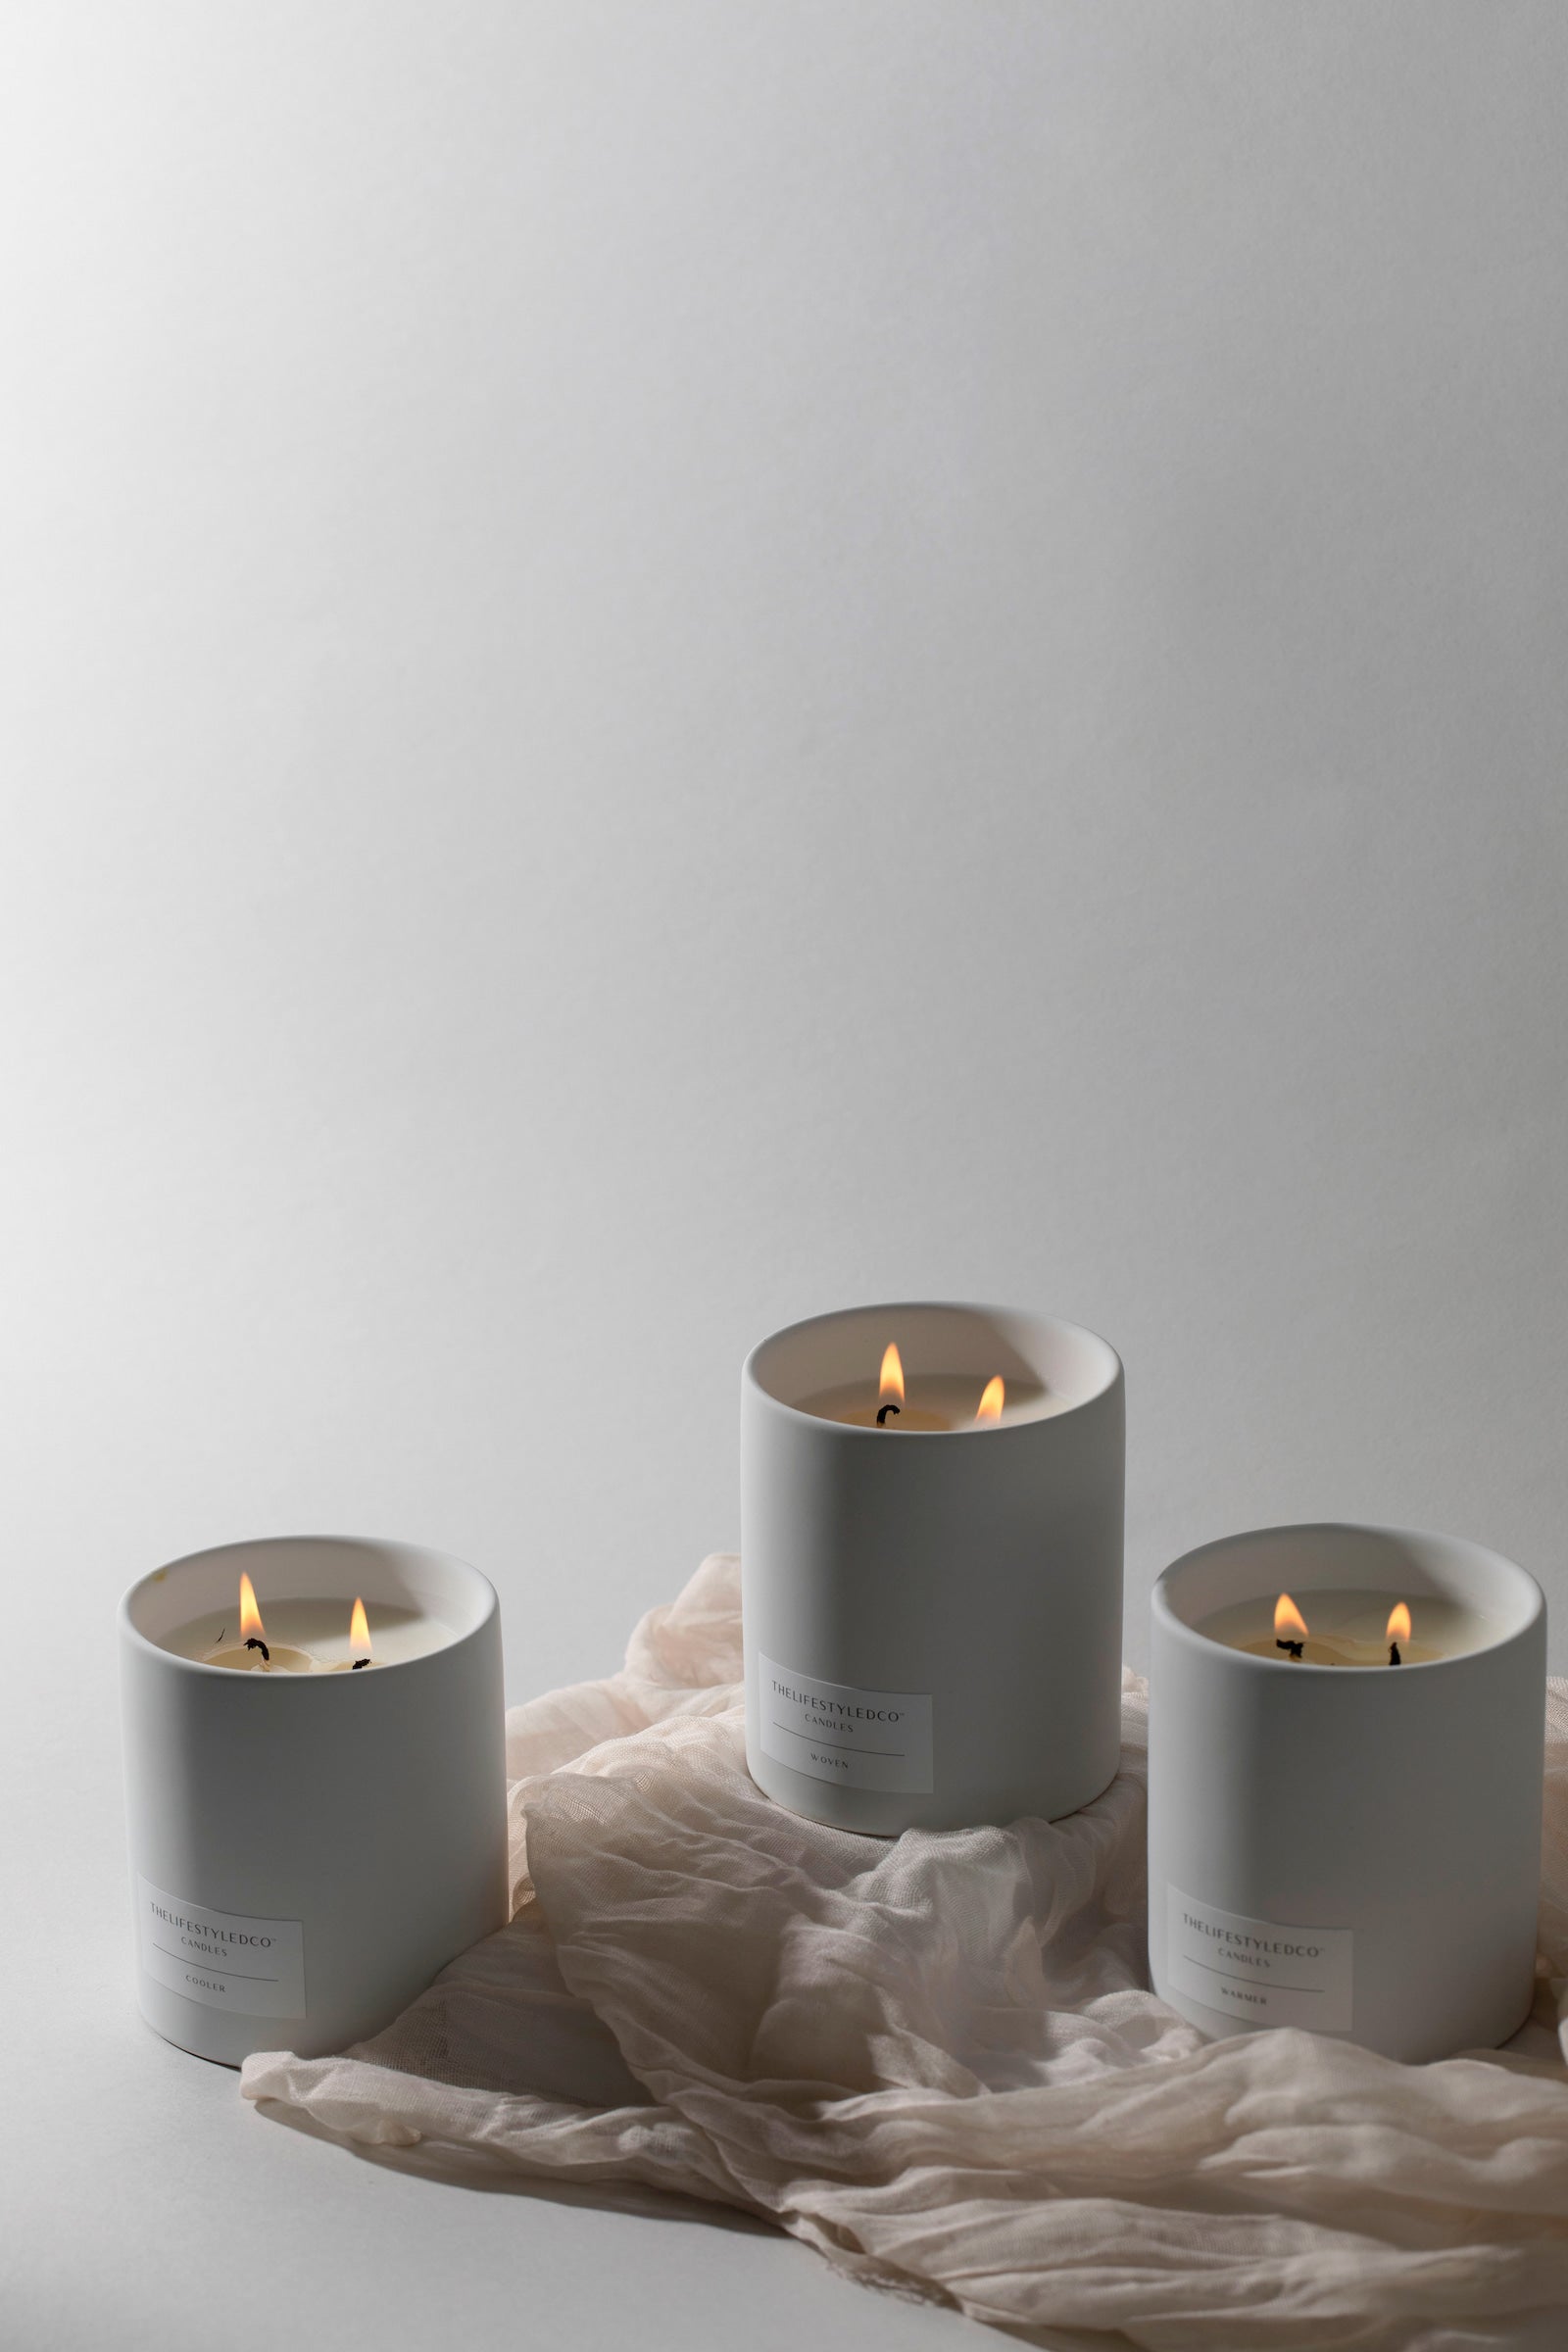 The A-Side 3 Wick Luxury Scented Candle Collection – Wick and Glow Candle  Company™